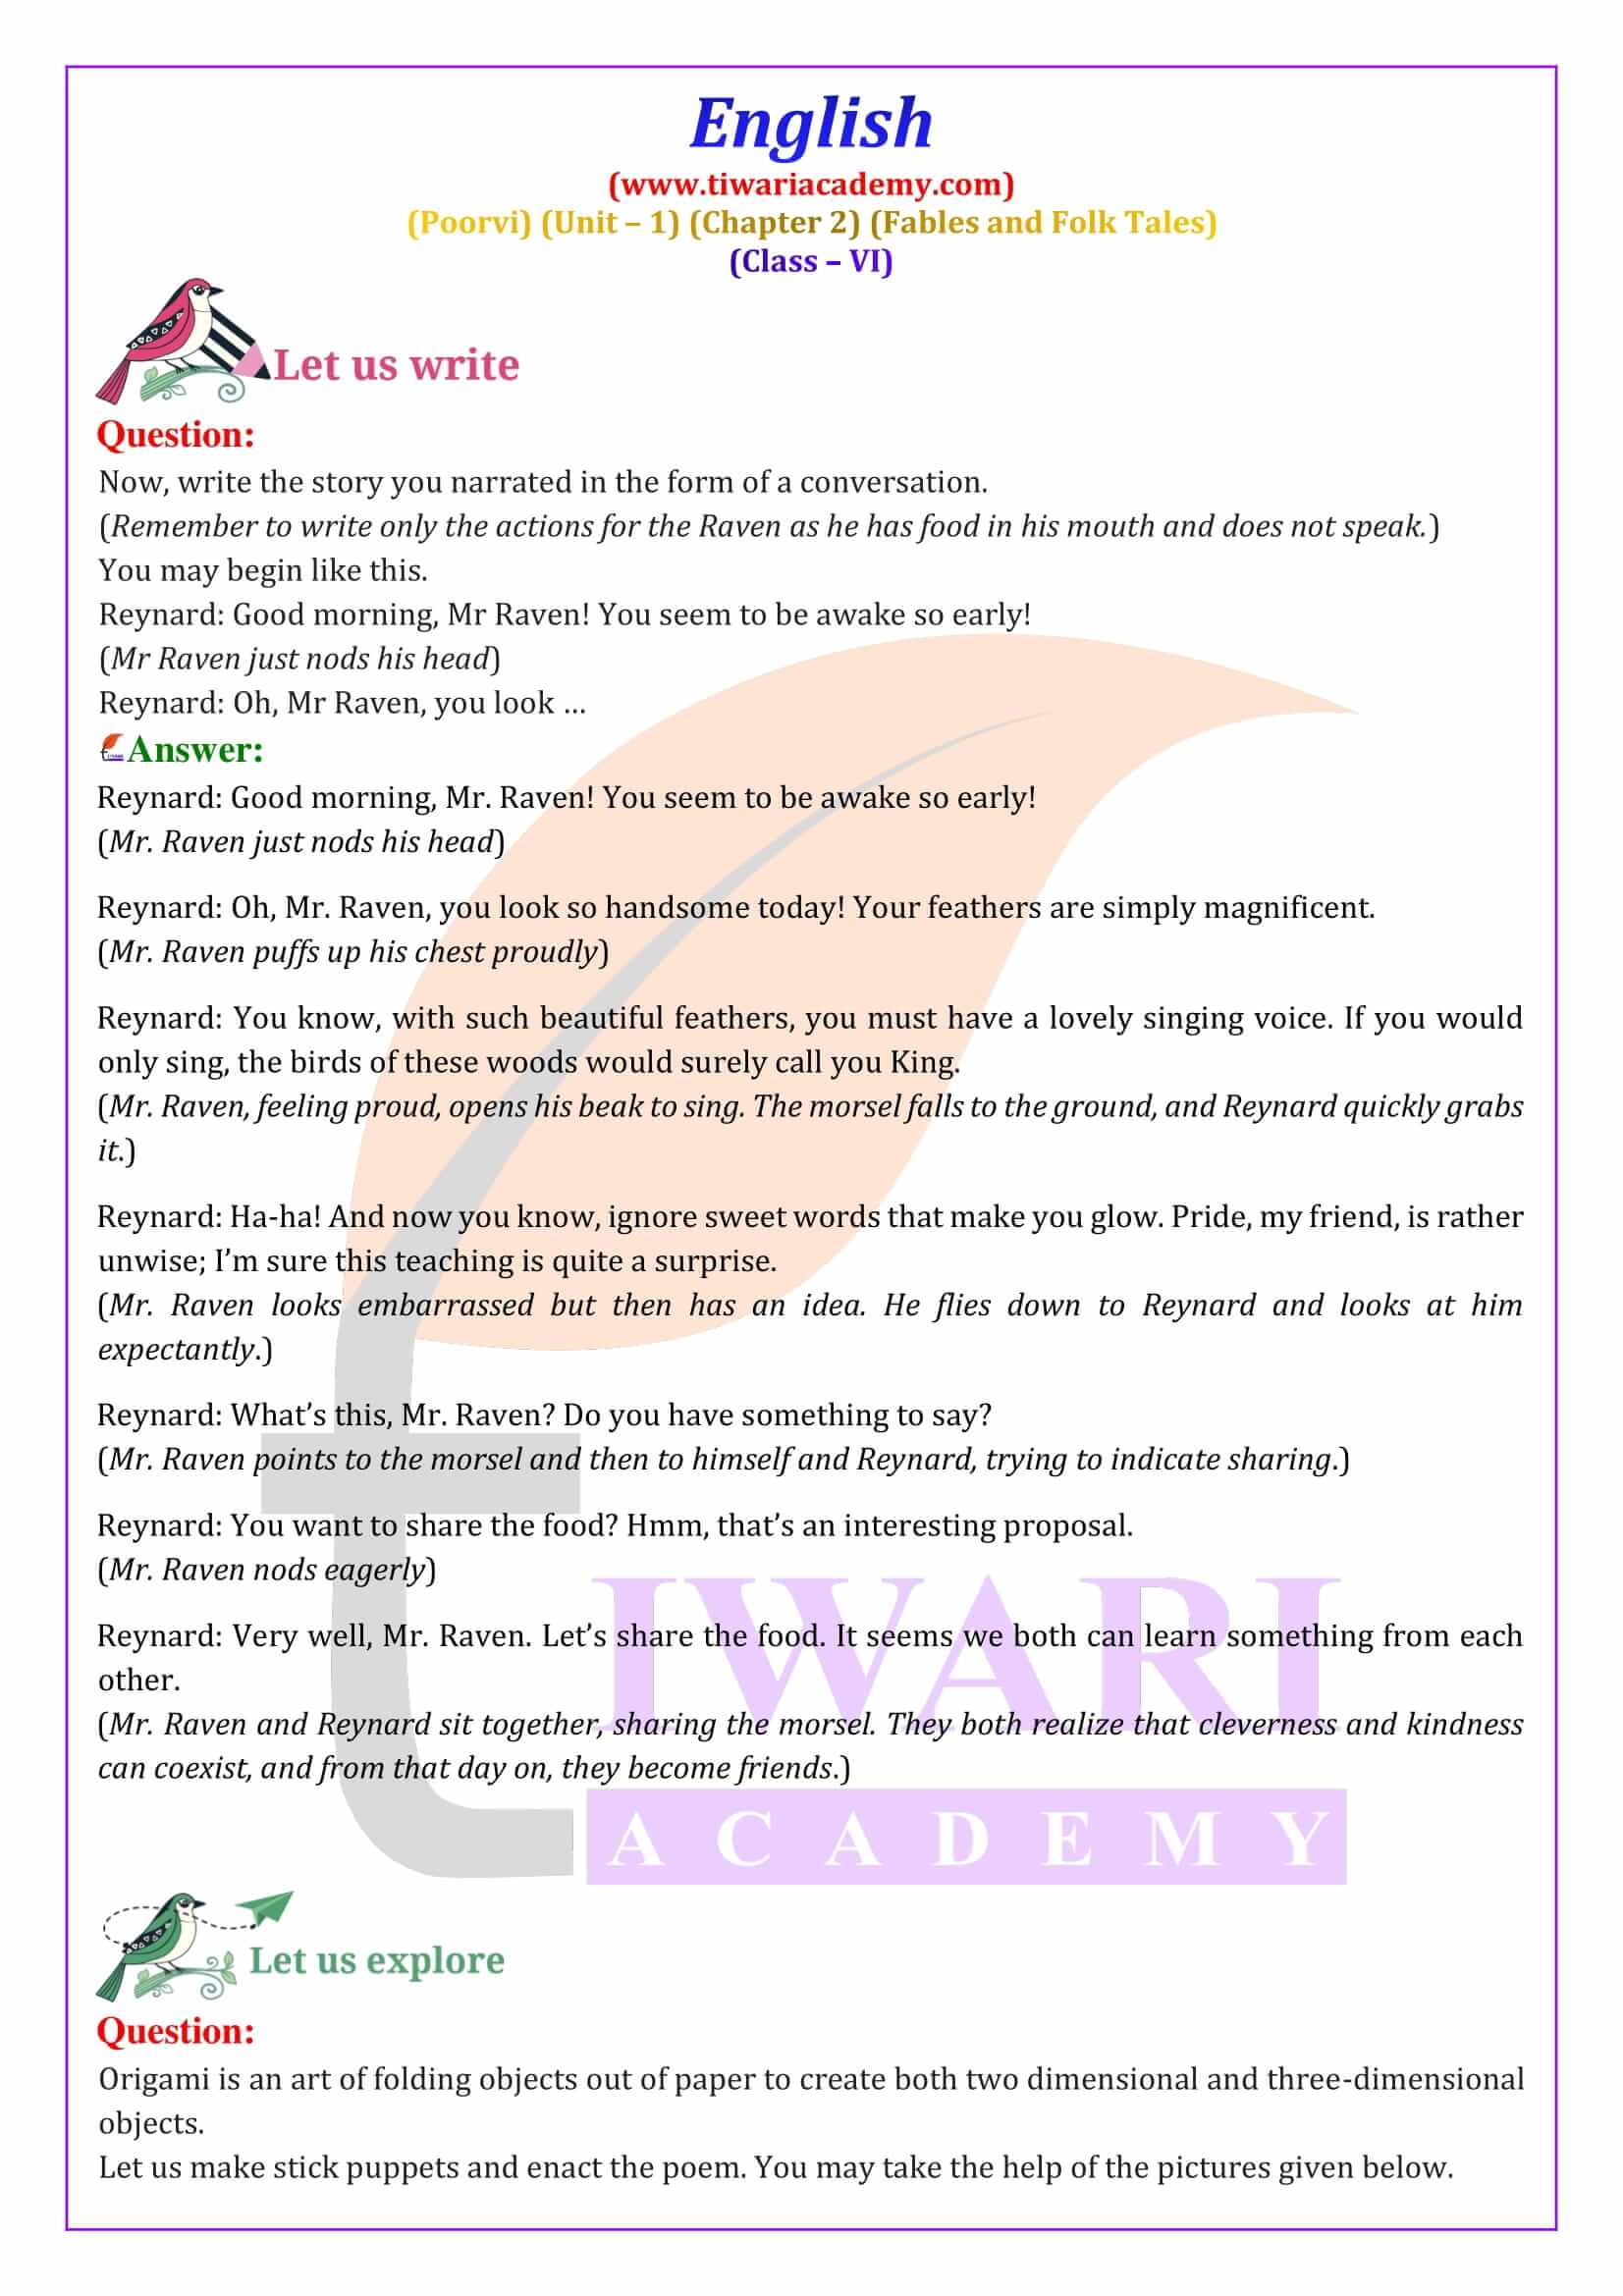 Class 6 English Poorvi Unit 1 Fables and Folk Tales A Bottle of Chapter 2 NCERT Answers